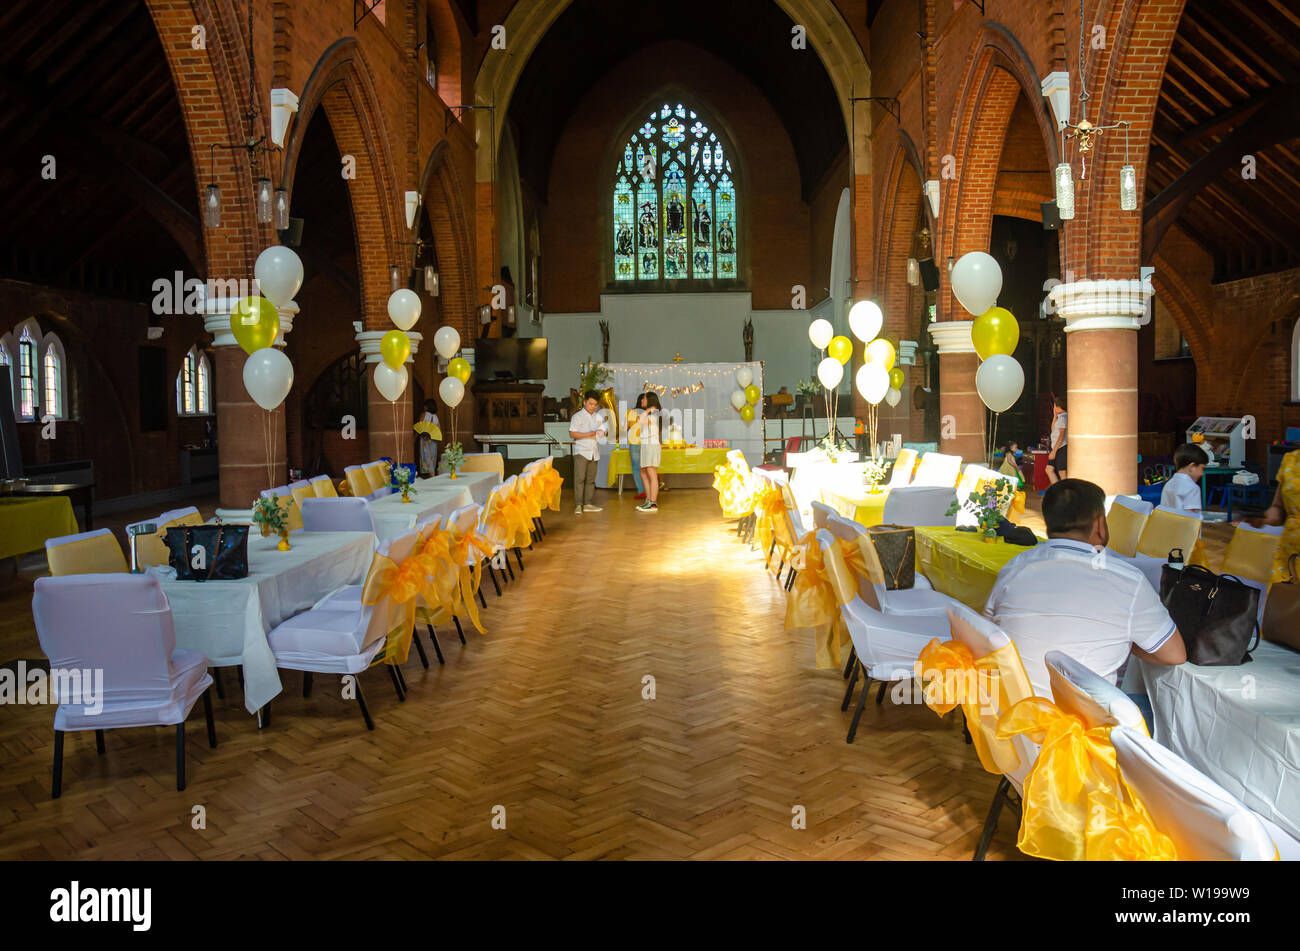 A church hall laid out with tables and chairs dressed in white fabric with yellow ribbon bows ready for a party or reception. Stock Photo